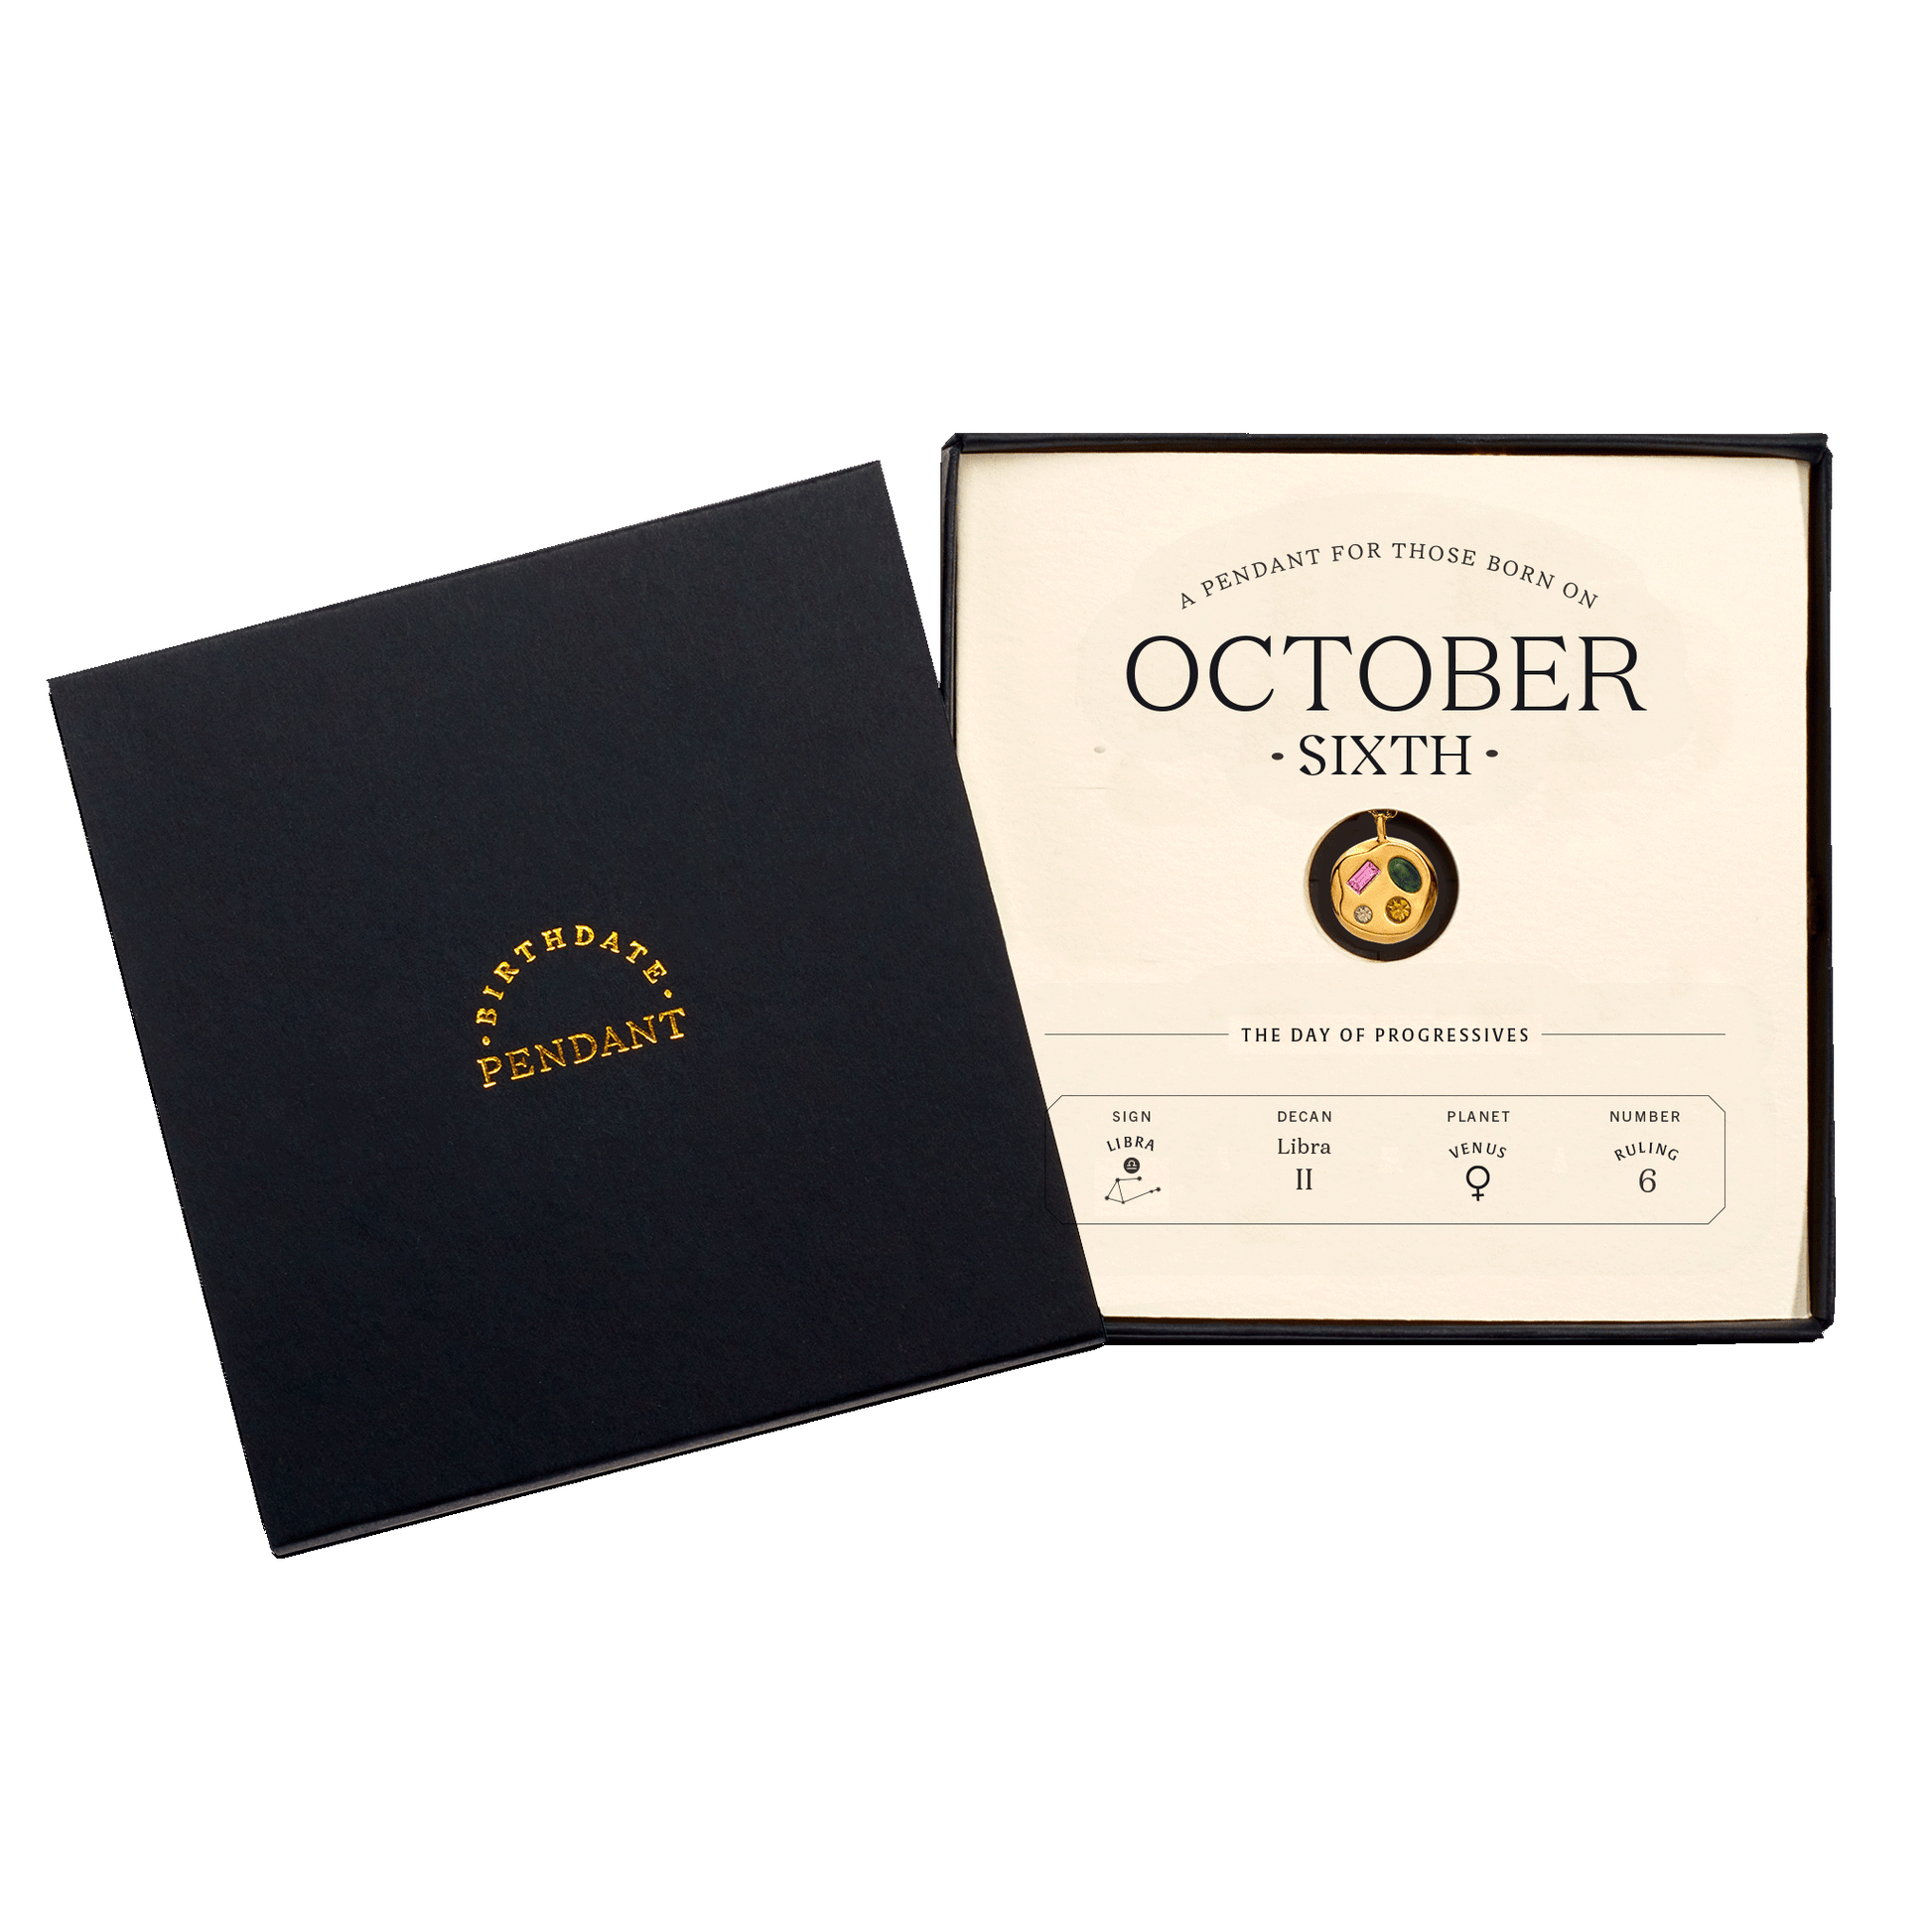 The October Sixth Pendant inside its box